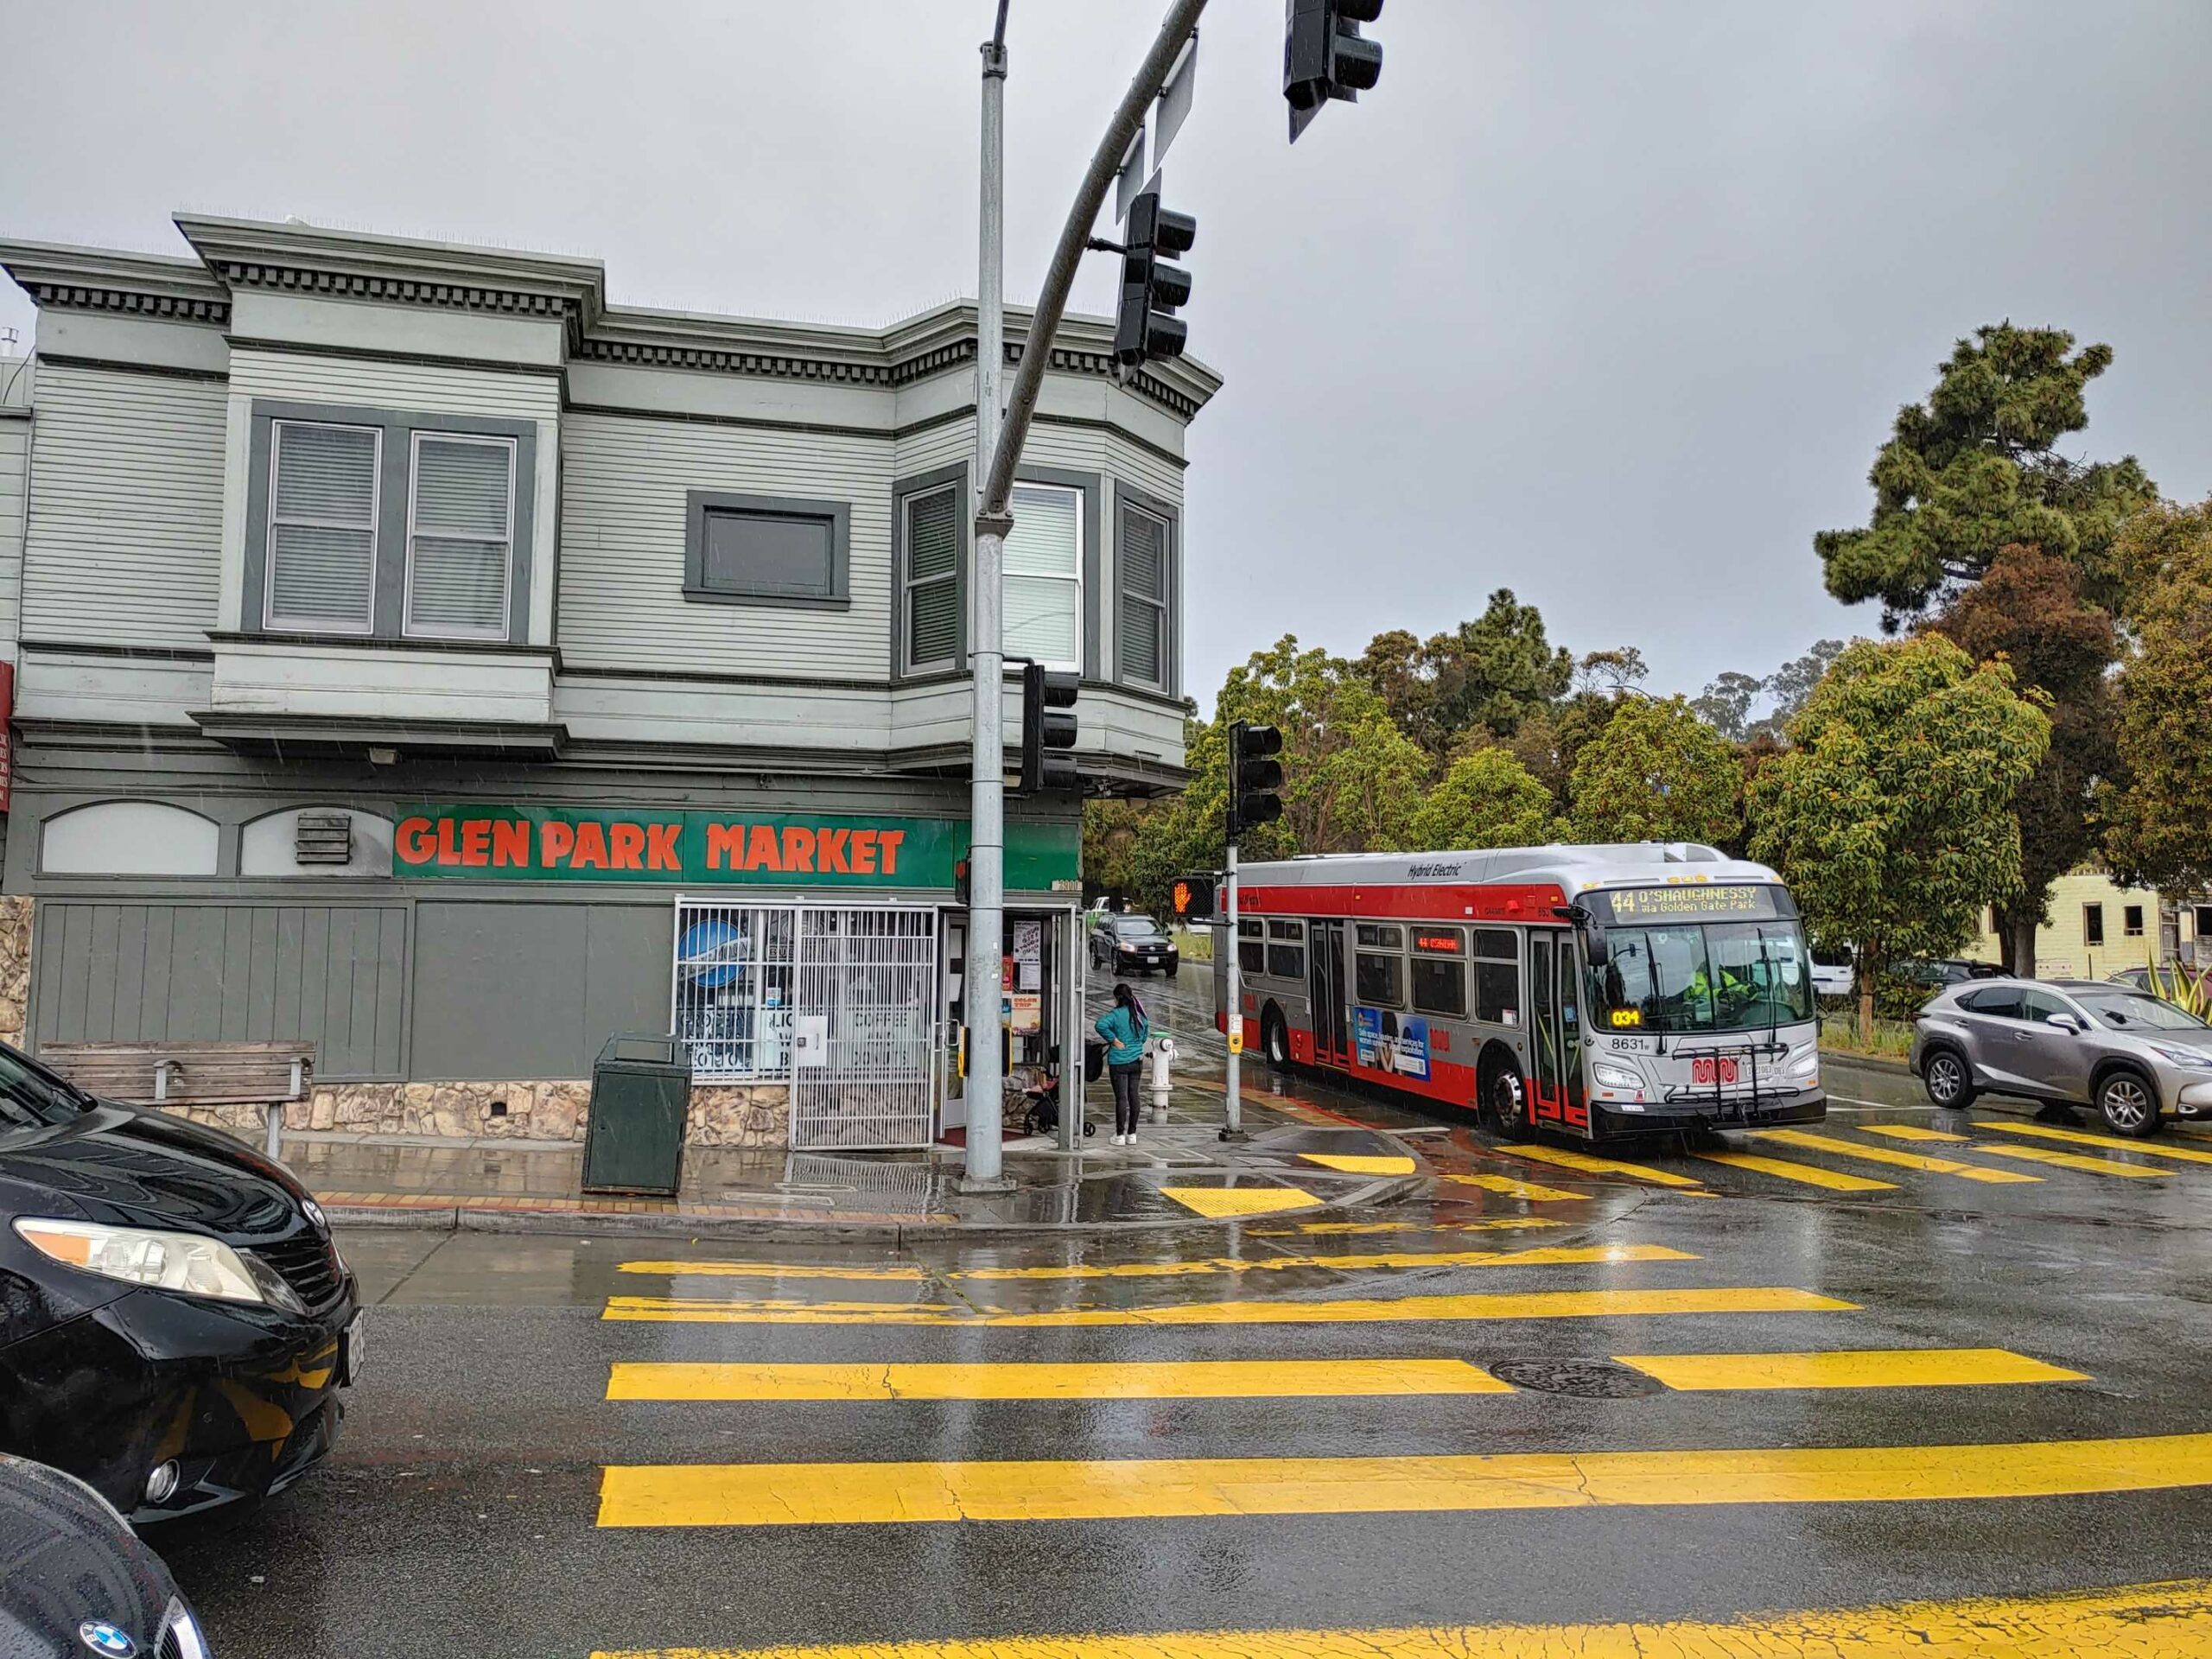 A red bus stops near a crosswalk by the Glen Park Market, on a cloudy and likely rainy day.